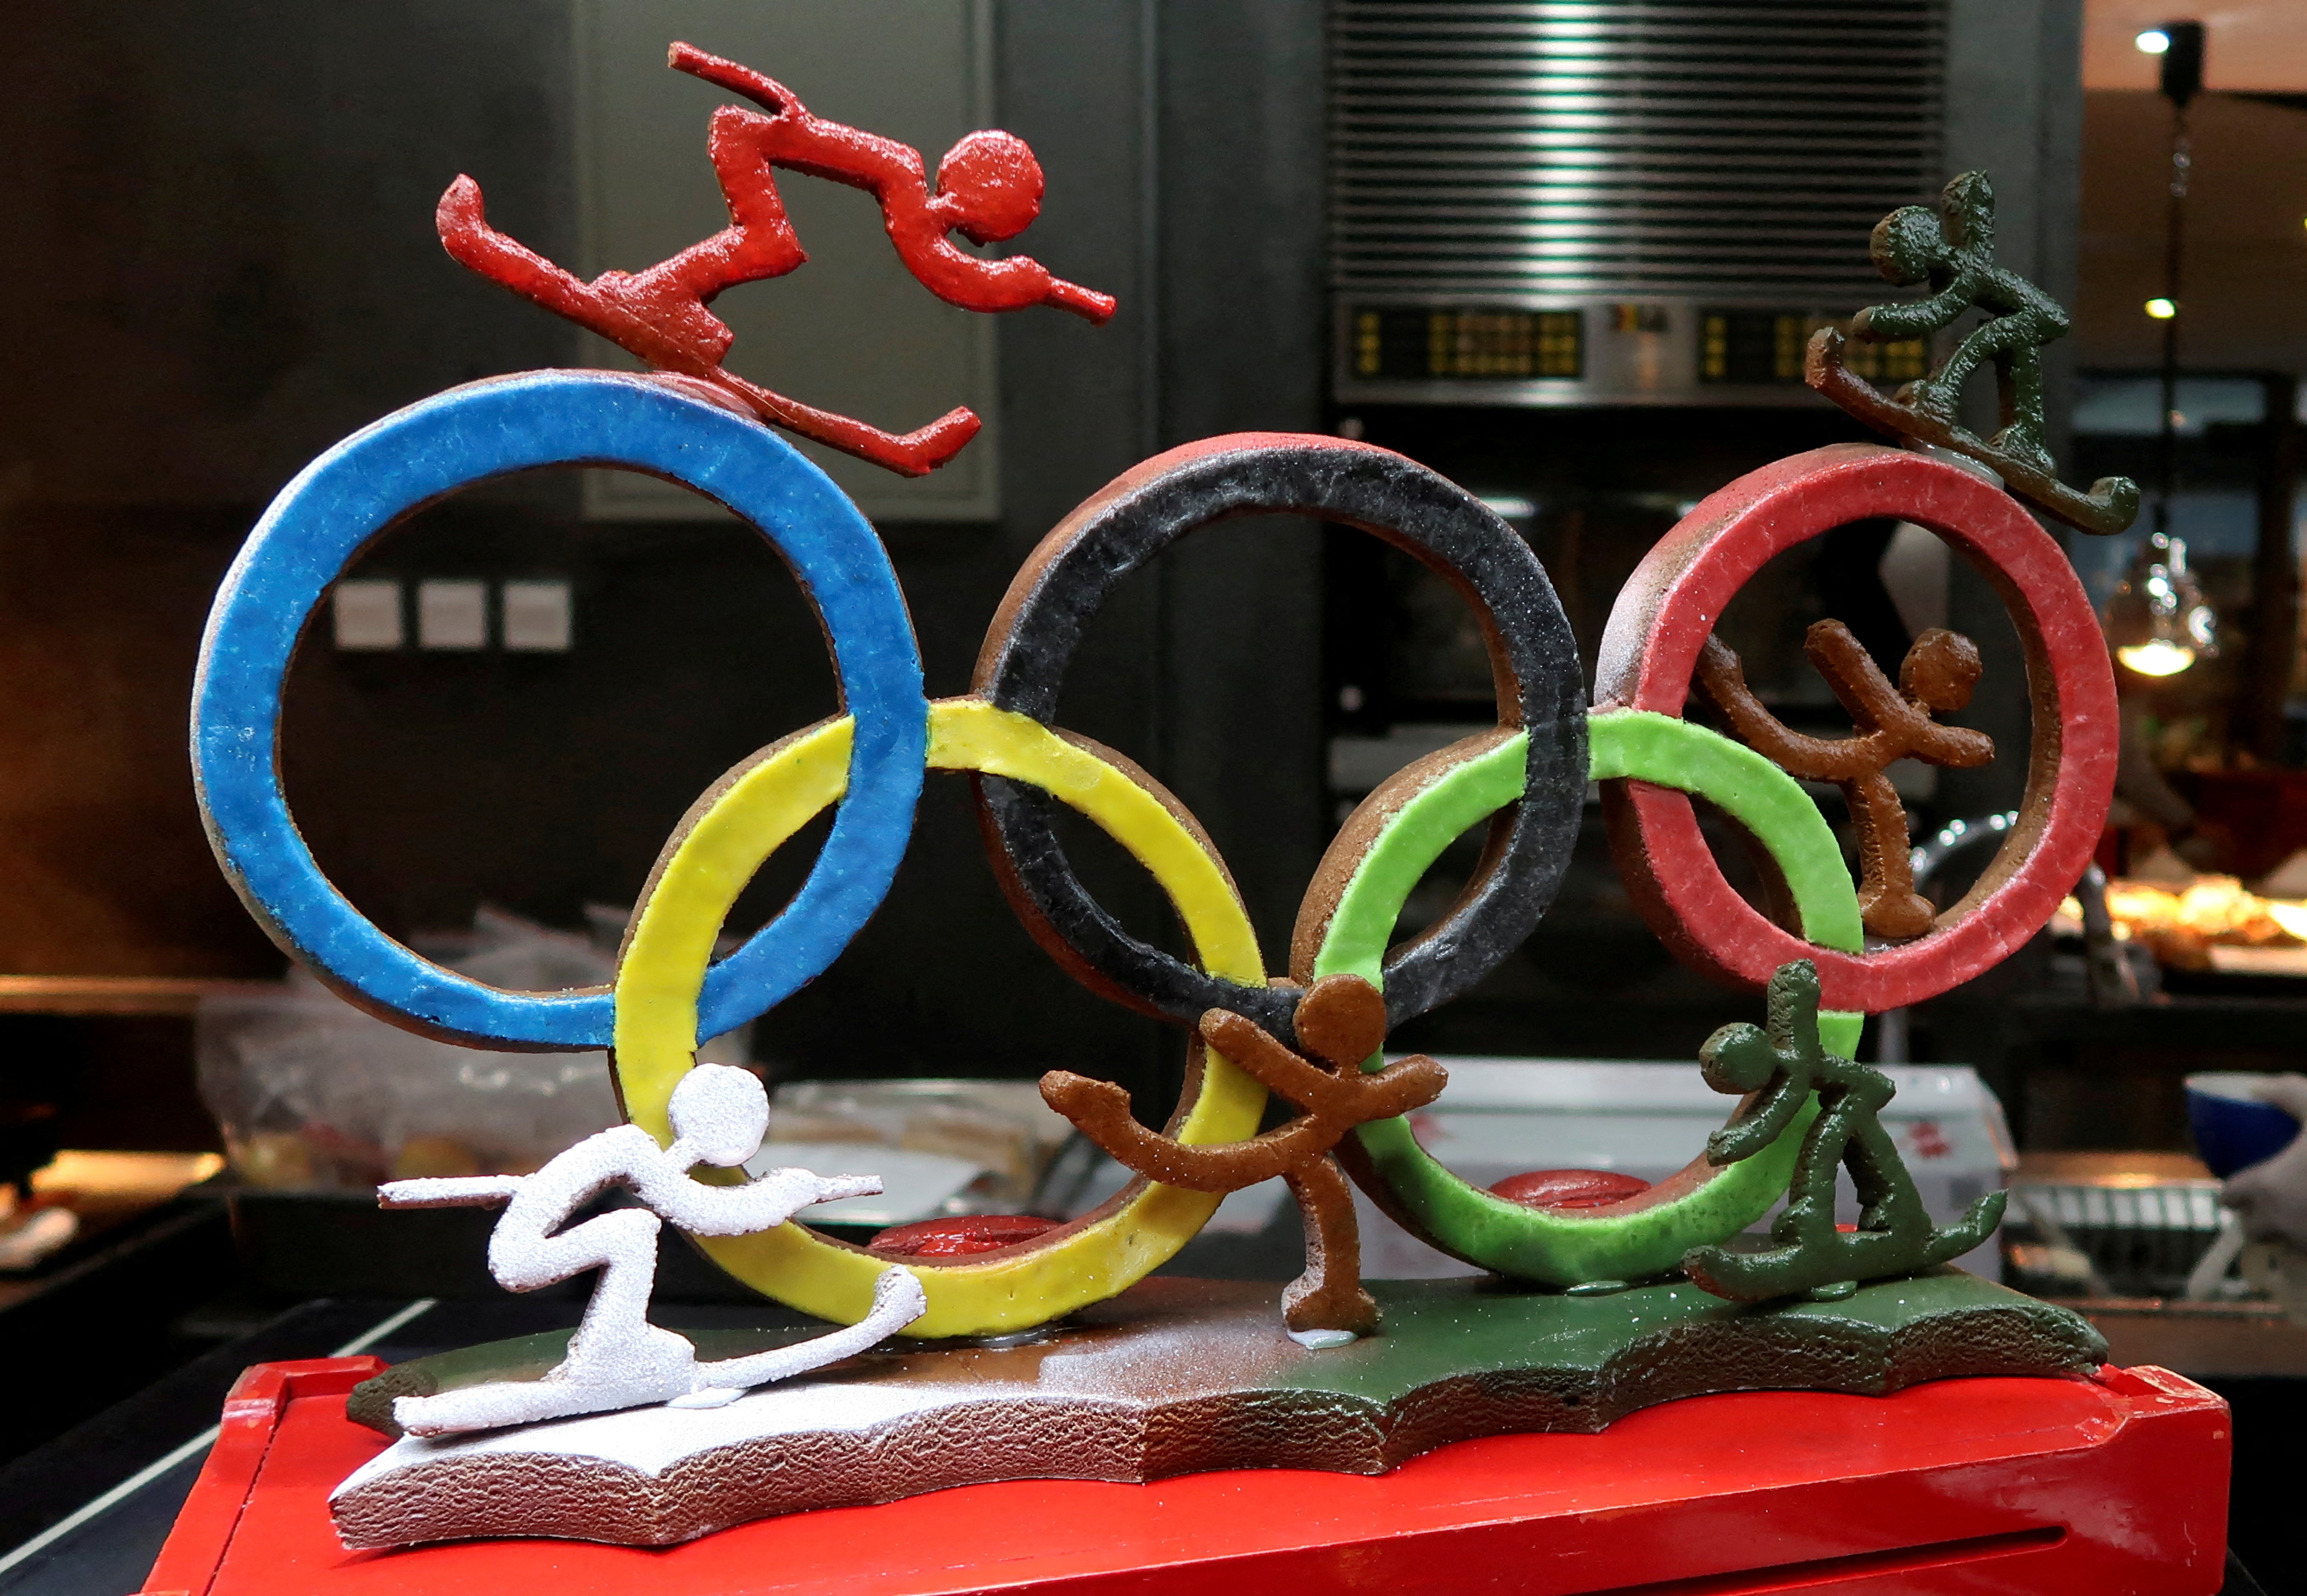 A baking creation of the Olympic rings is on display during breakfast for guests of a hotel ahead of the Beijing 2022 Winter Olympics in Beijing, China January 8, 2022.    REUTERS/Fabrizio Bensch/File Photo